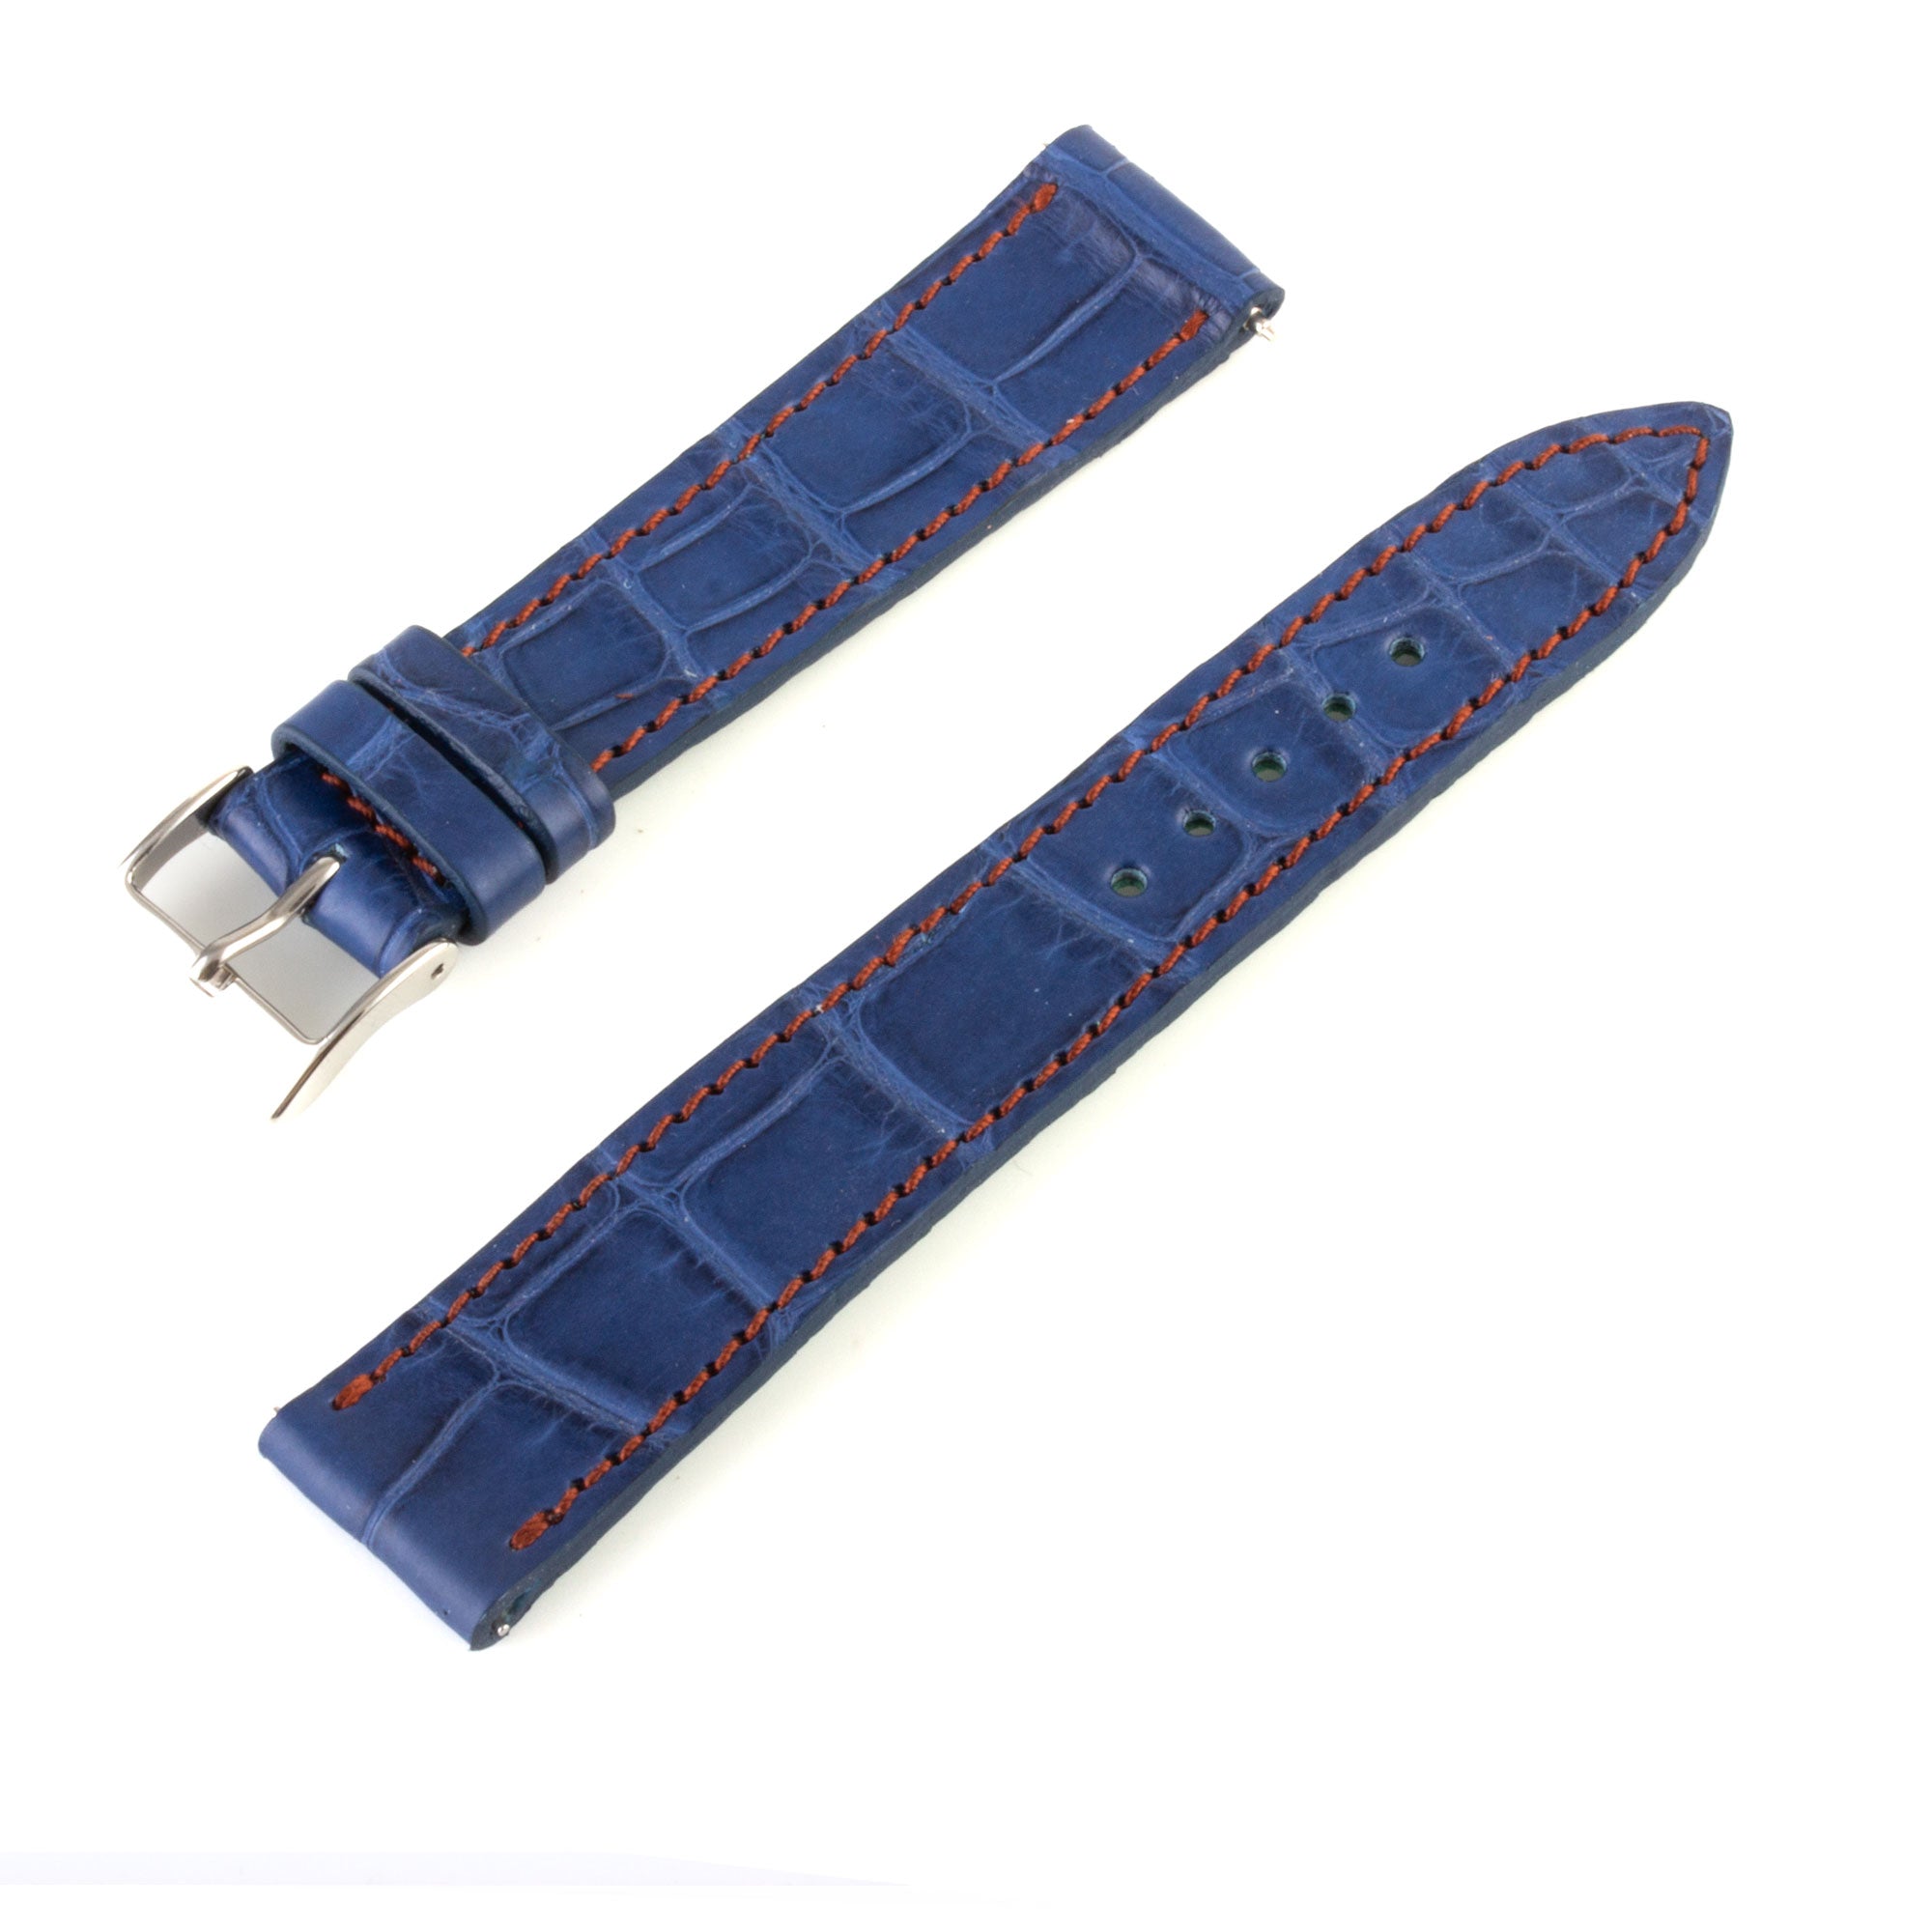 Alligator leather "Solo" watch band - 18mm width (0.71 inches) / Size M (n° 5)